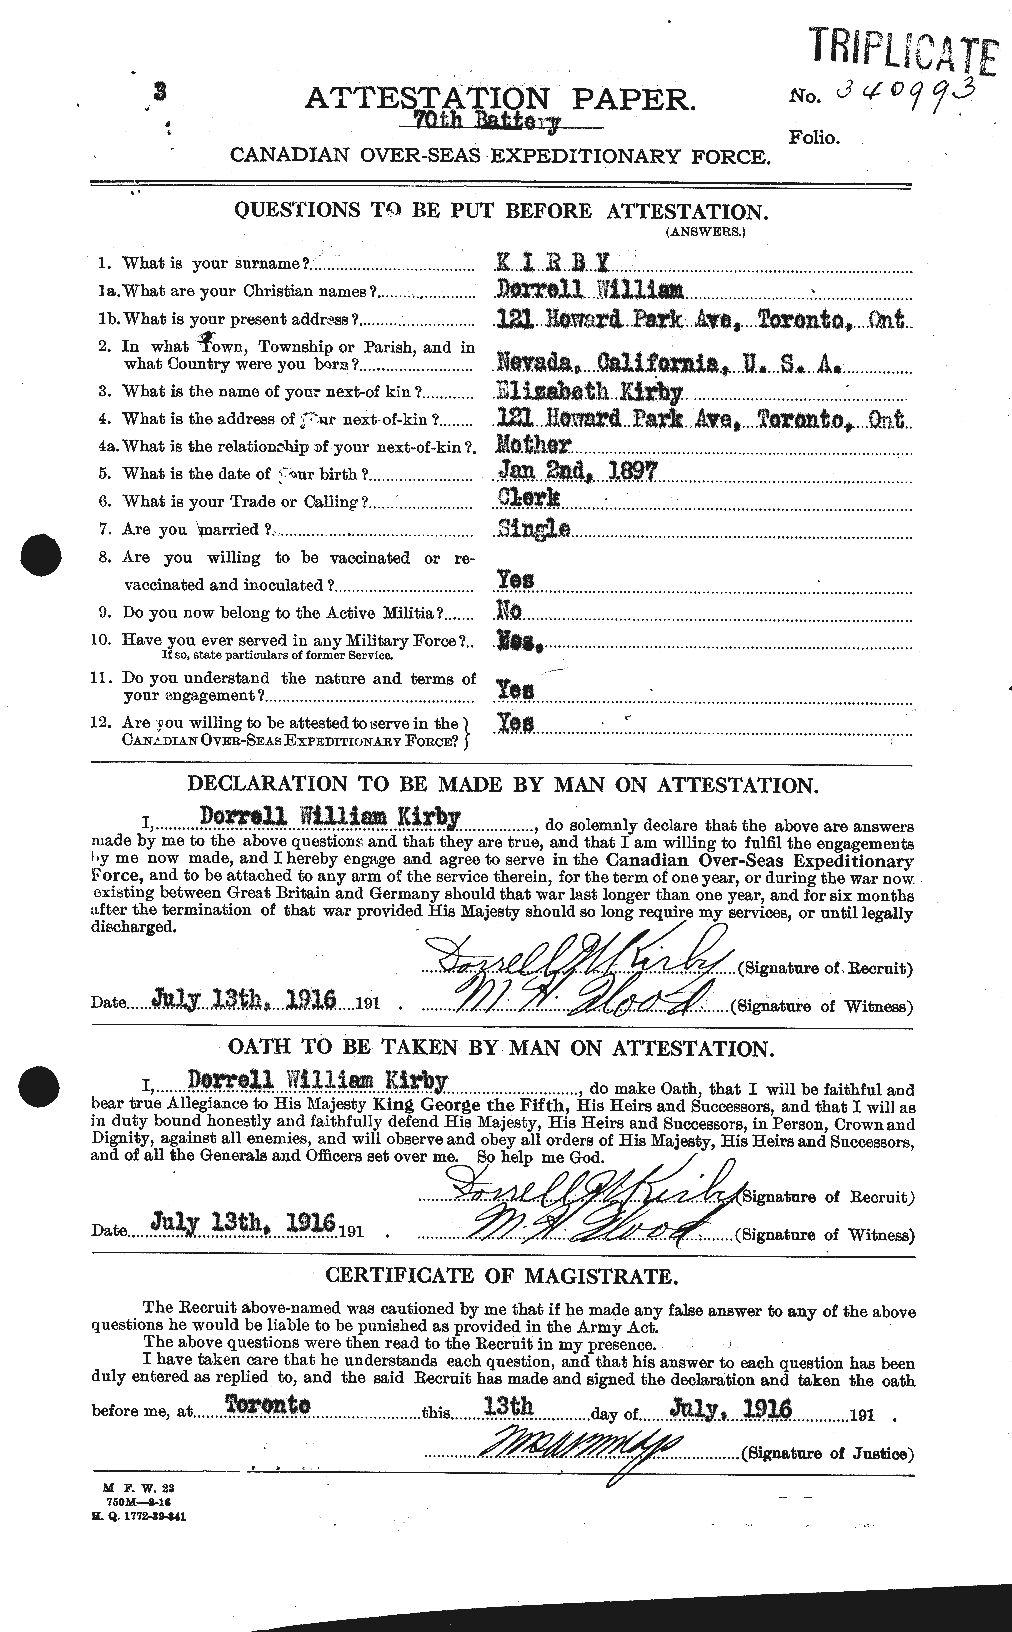 Personnel Records of the First World War - CEF 437175a